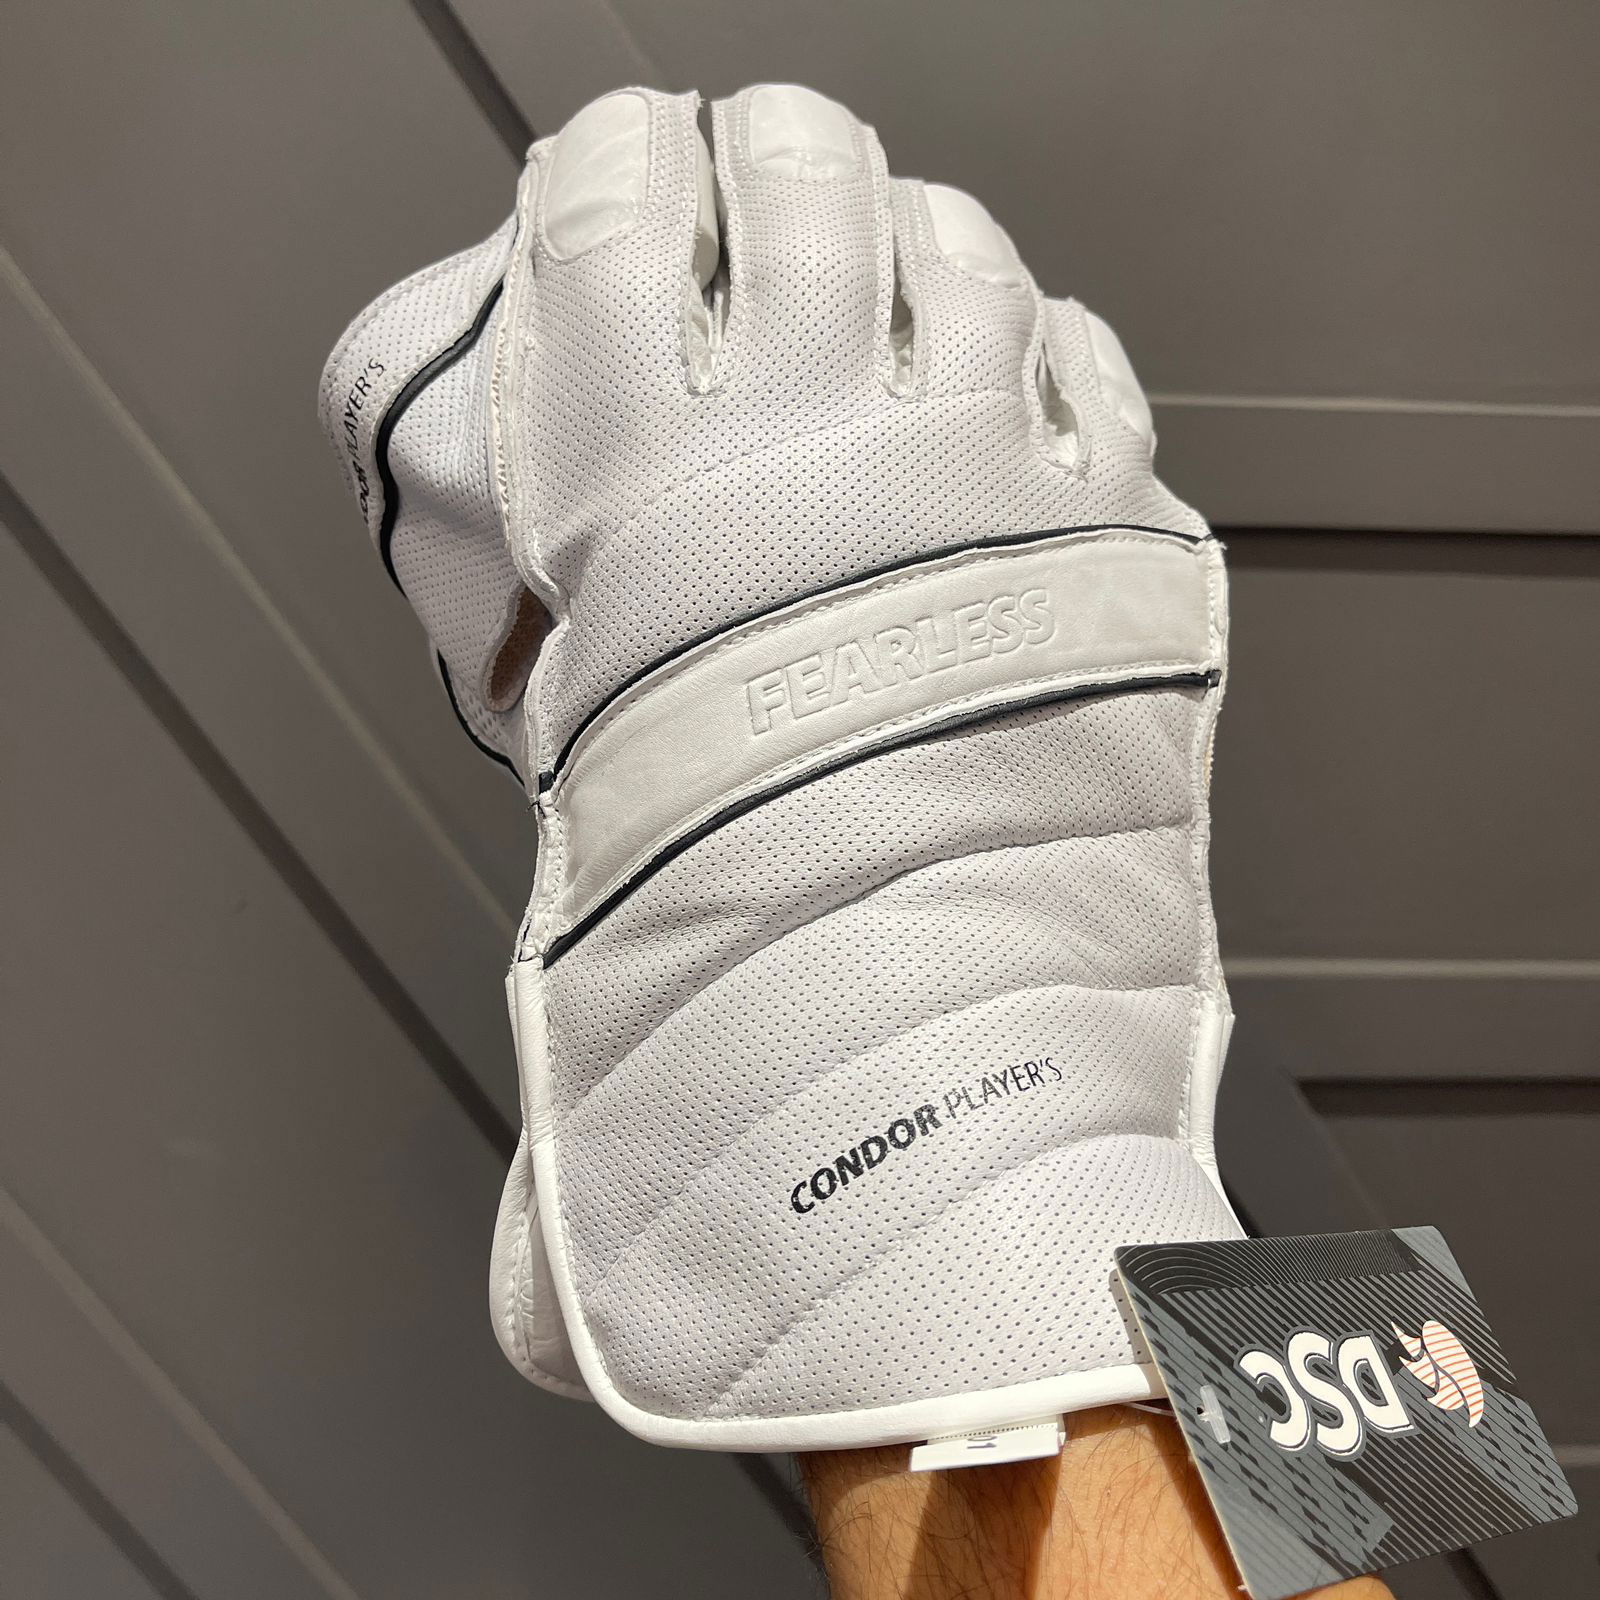 DSC Condor Players Wicketkeeping Gloves